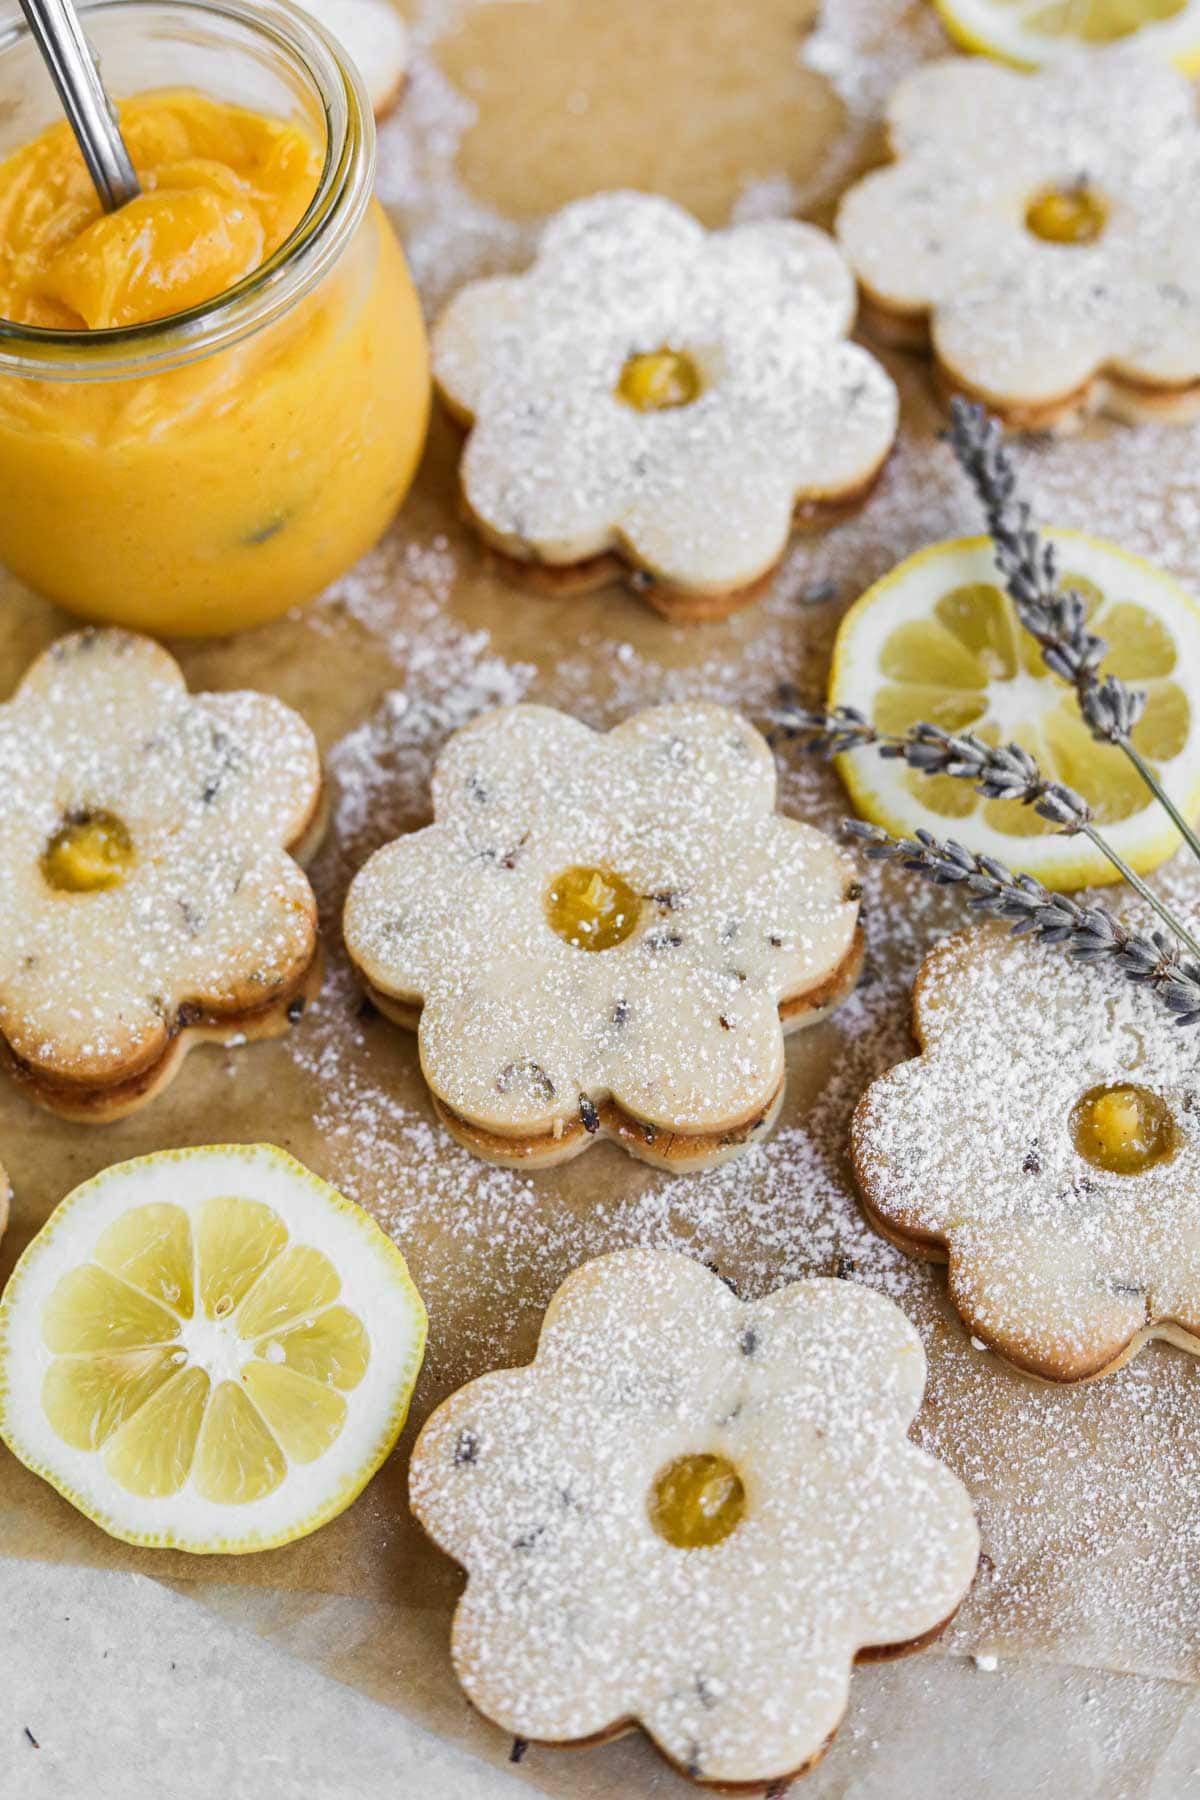 Lavender lemon cookies filled with lemon curd on a sheet of parchment paper with lemon slices and a jar of homemade lemon curd.